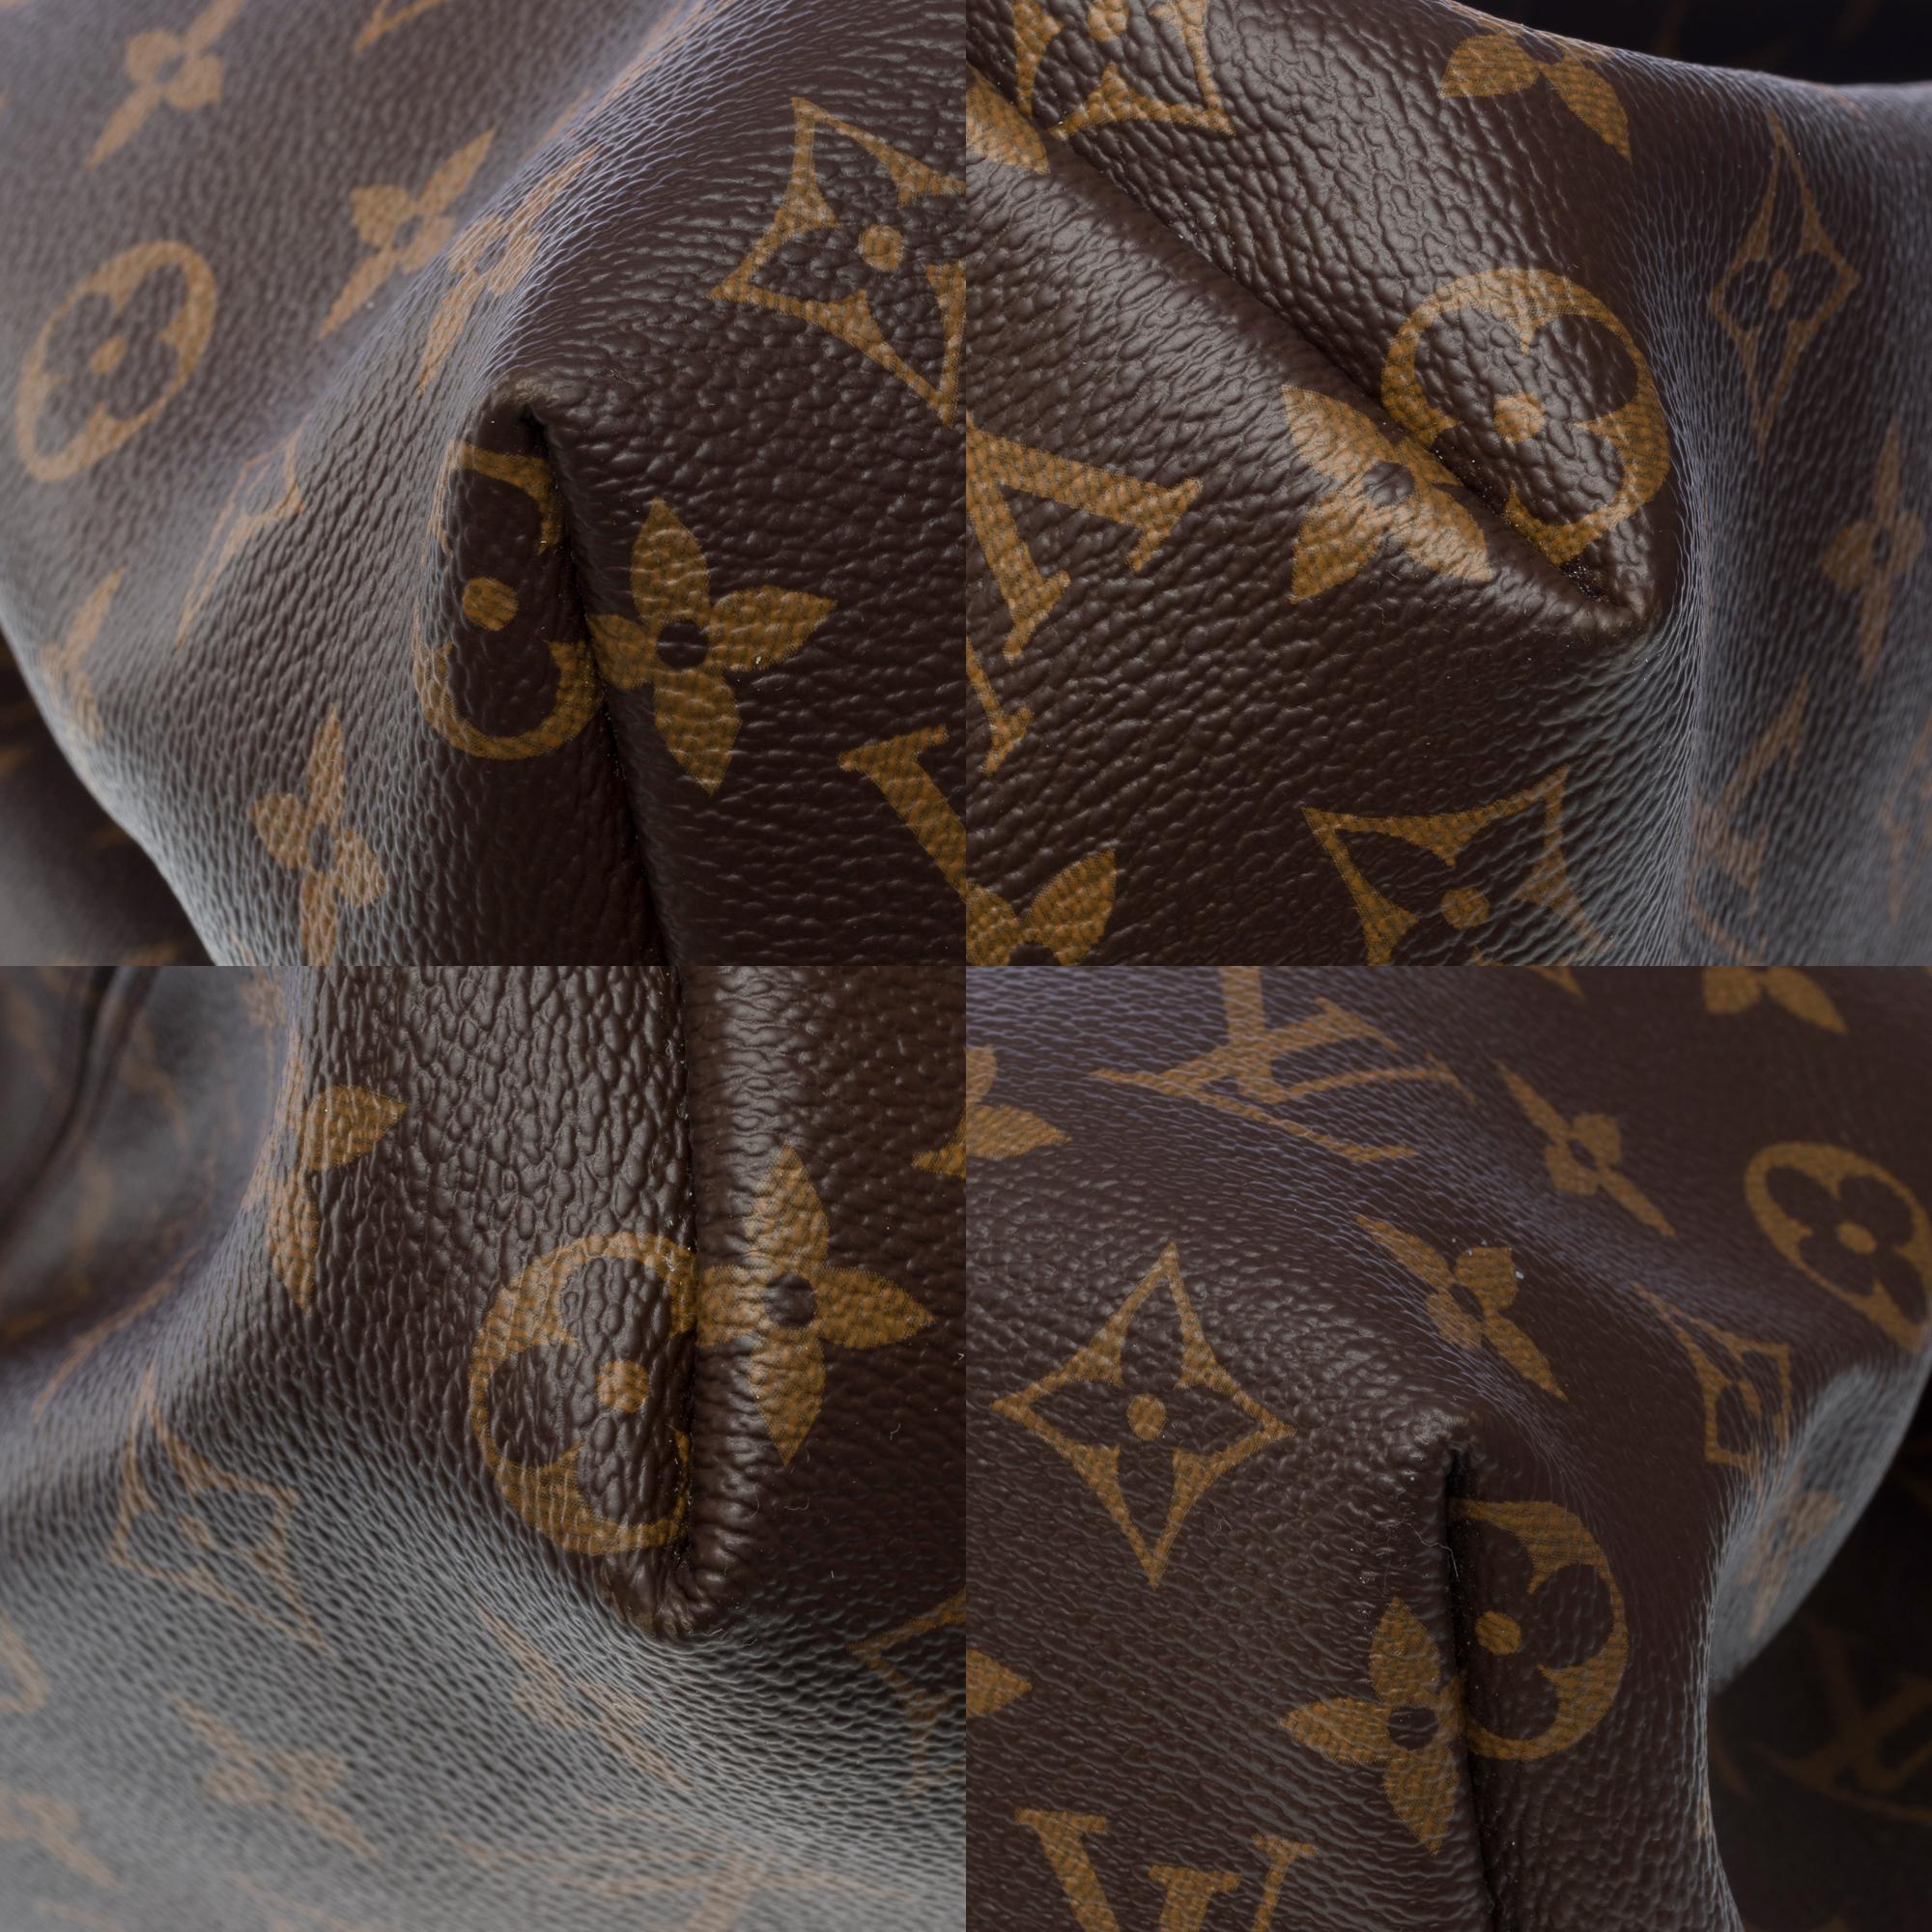 Louis Vuitton Graceful MM Tote bag in brown Monogram canvas, GHW For Sale 8